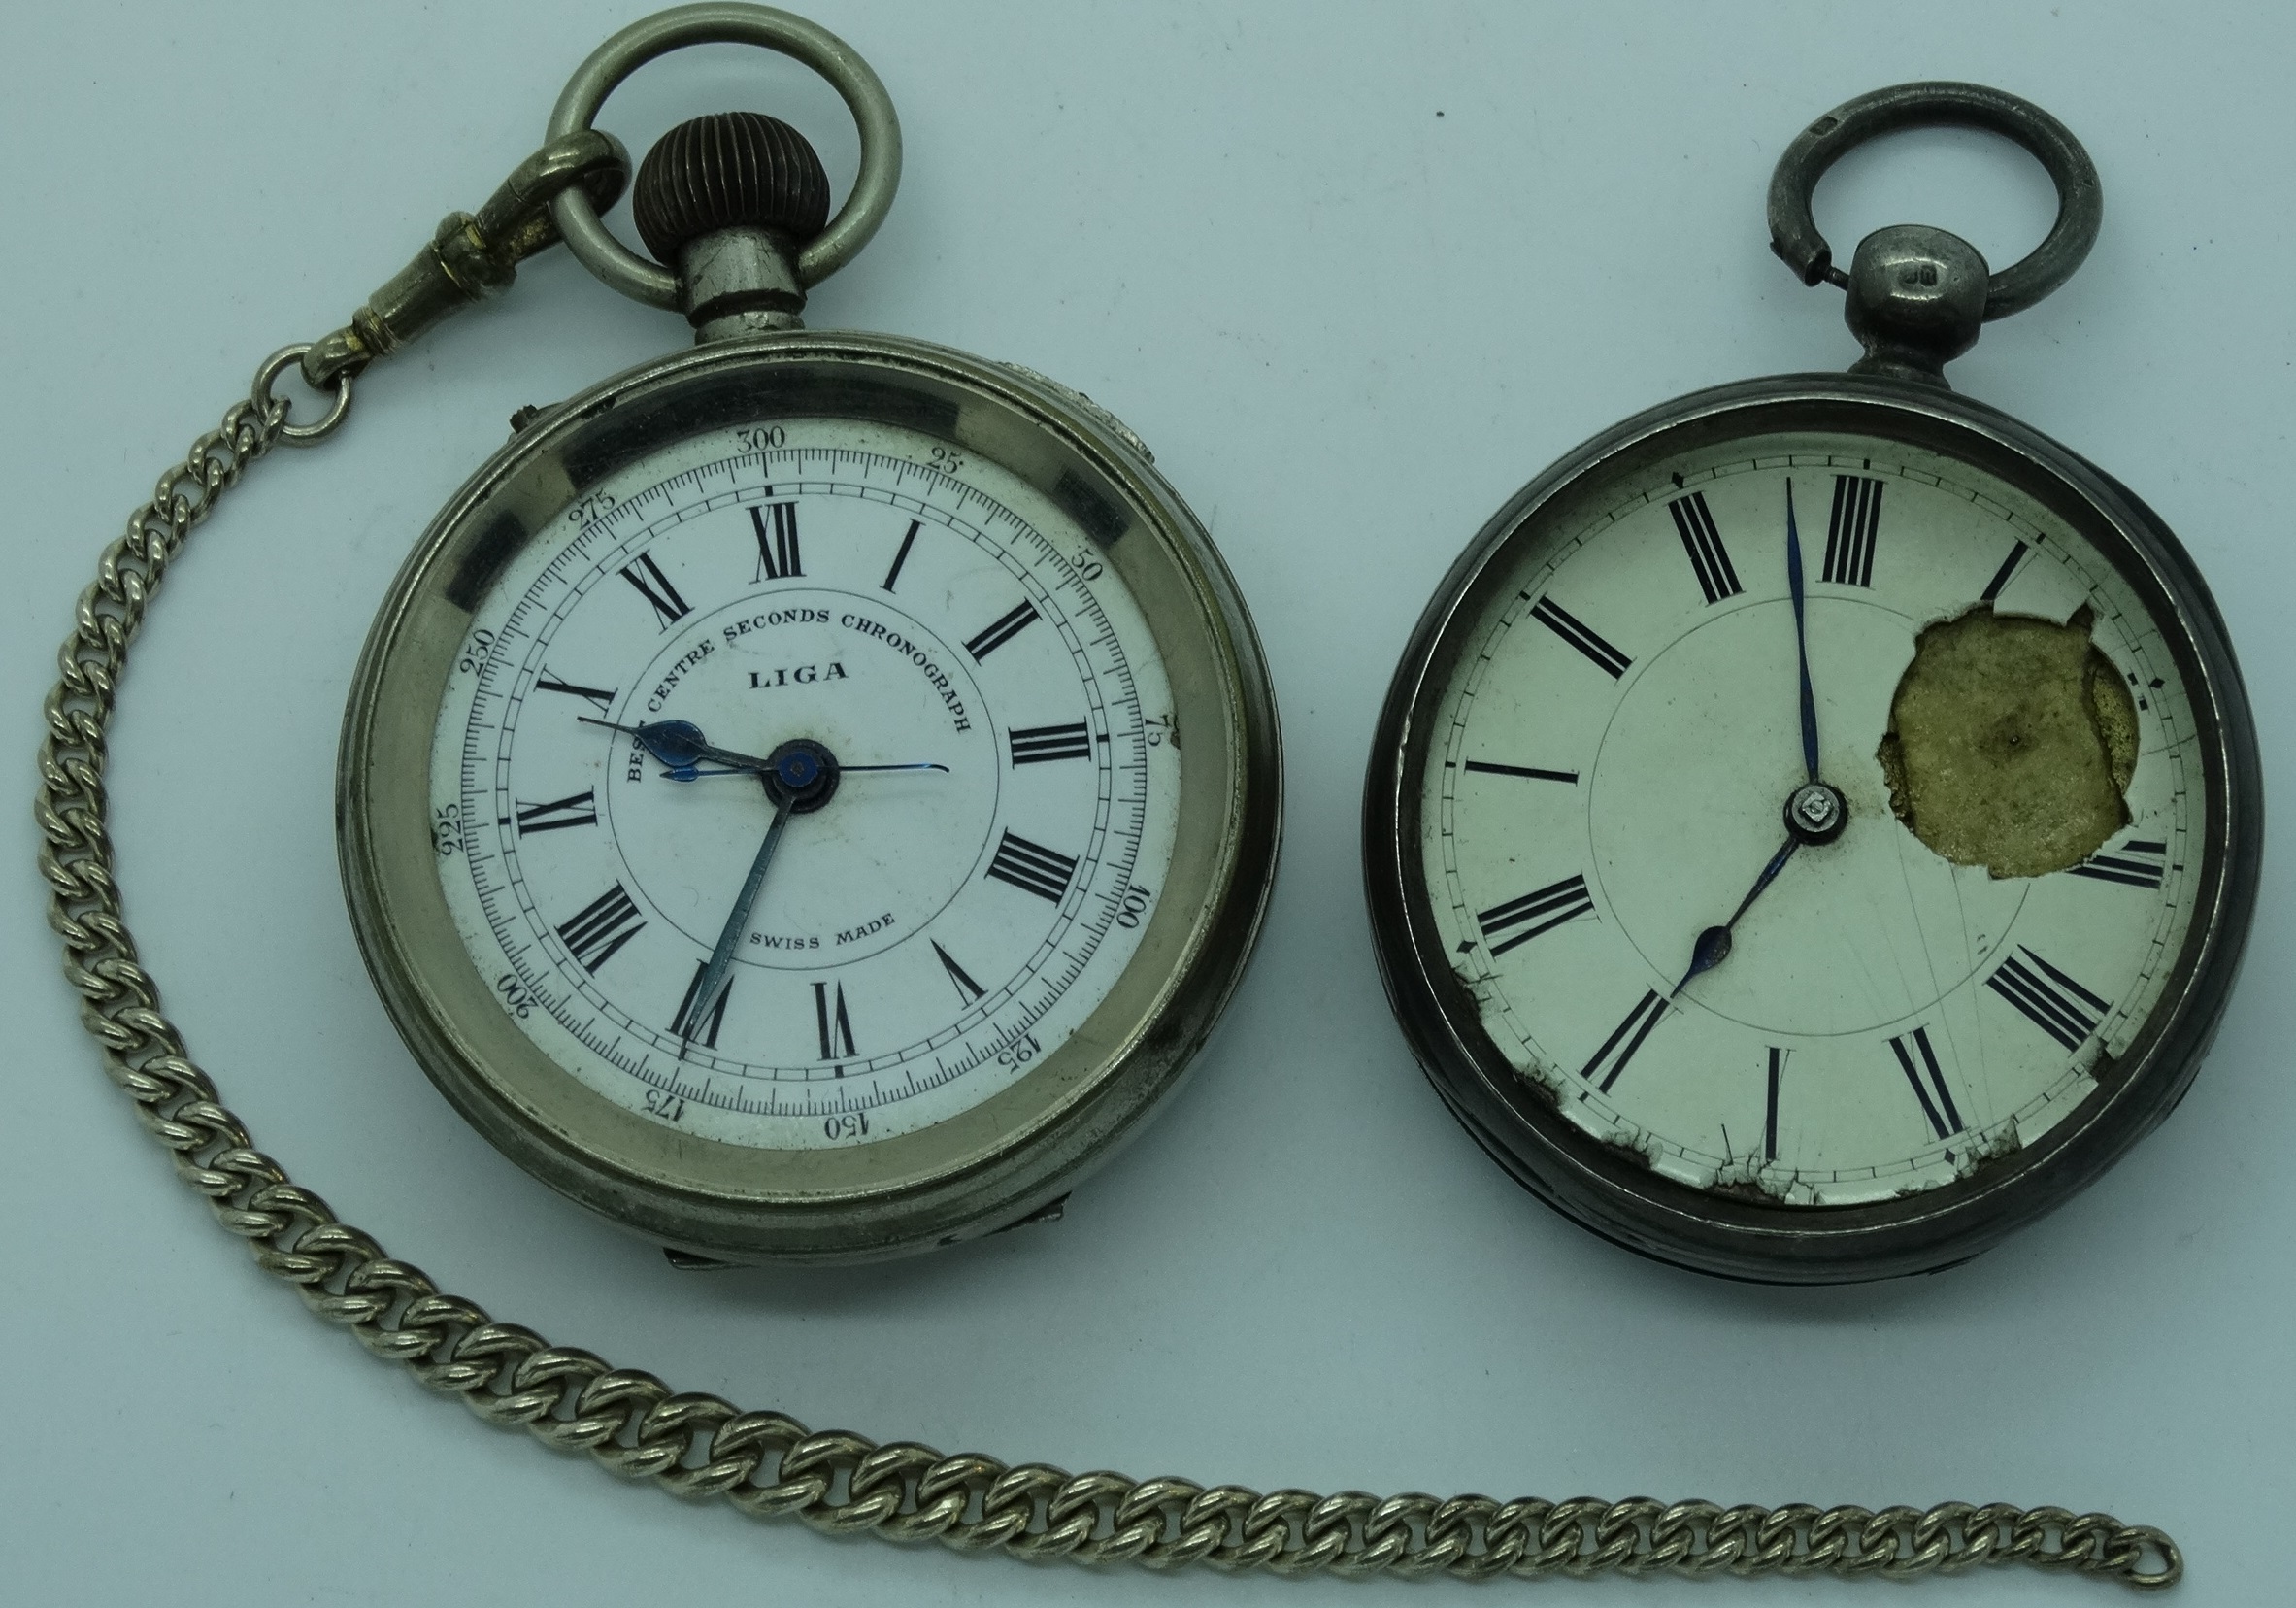 2 Pocket watches (1 by Liga)